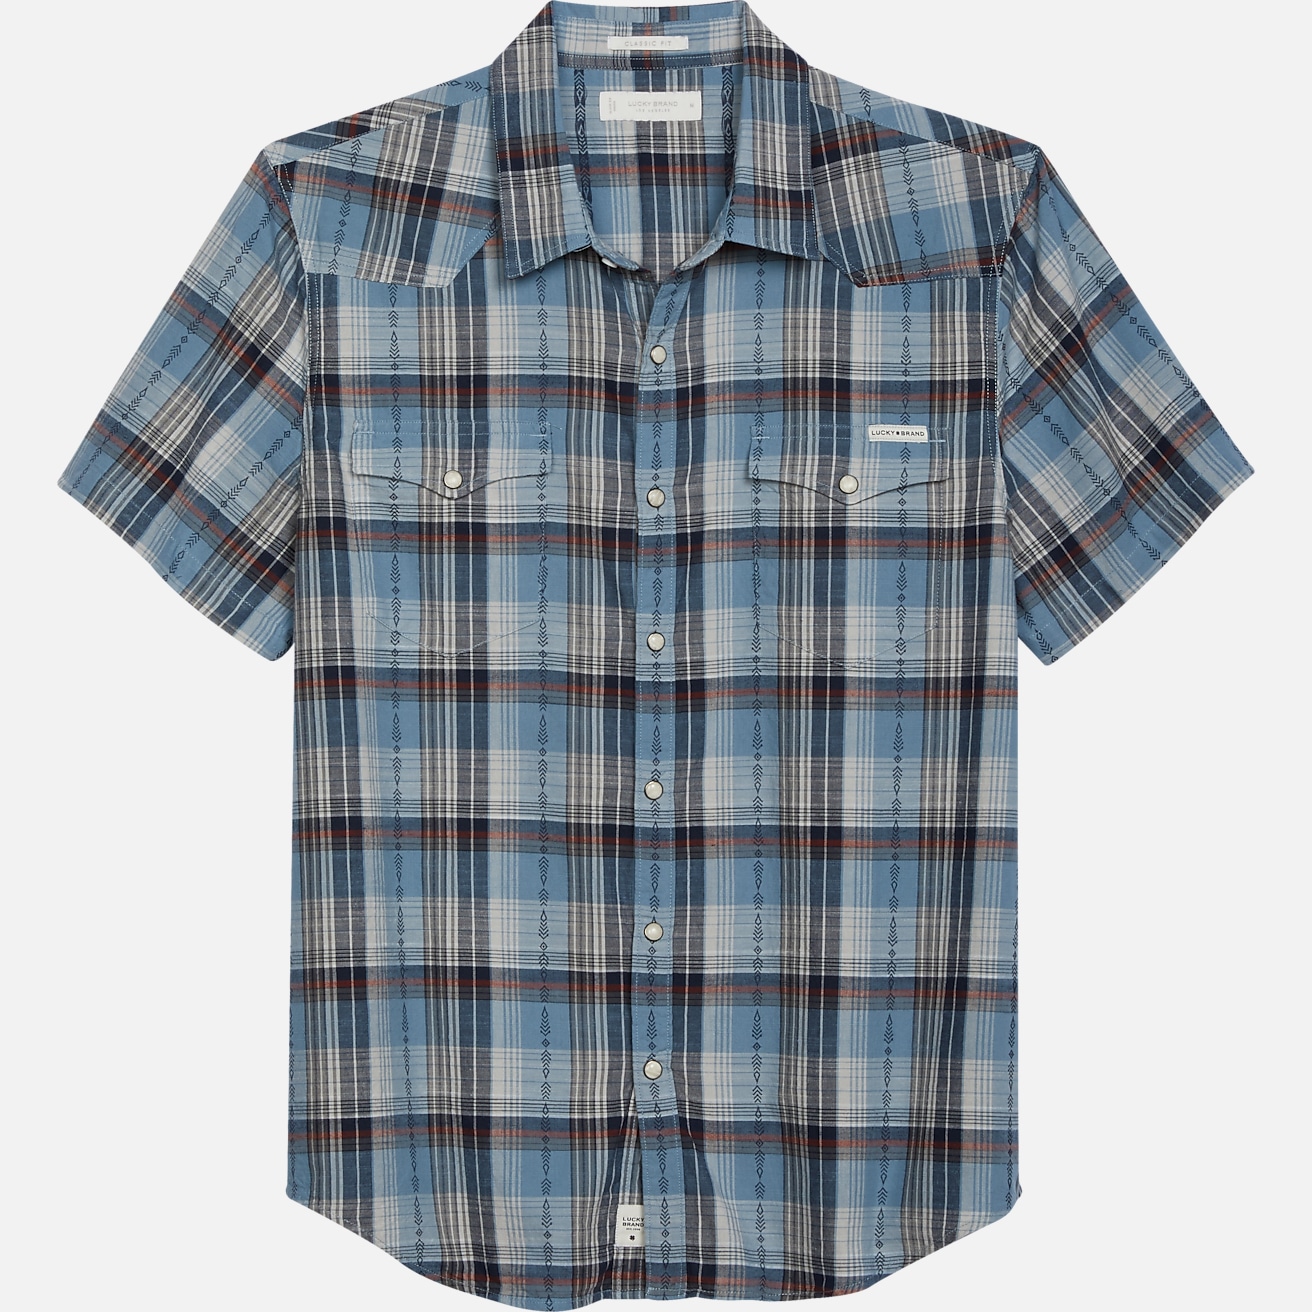 https://image.menswearhouse.com/is/image/TMW/TMW_6NJM_14_LUCKY_BRAND_SPORT_SHIRTS_MED_BLUE_MAIN?imPolicy=pdp-mob-2x